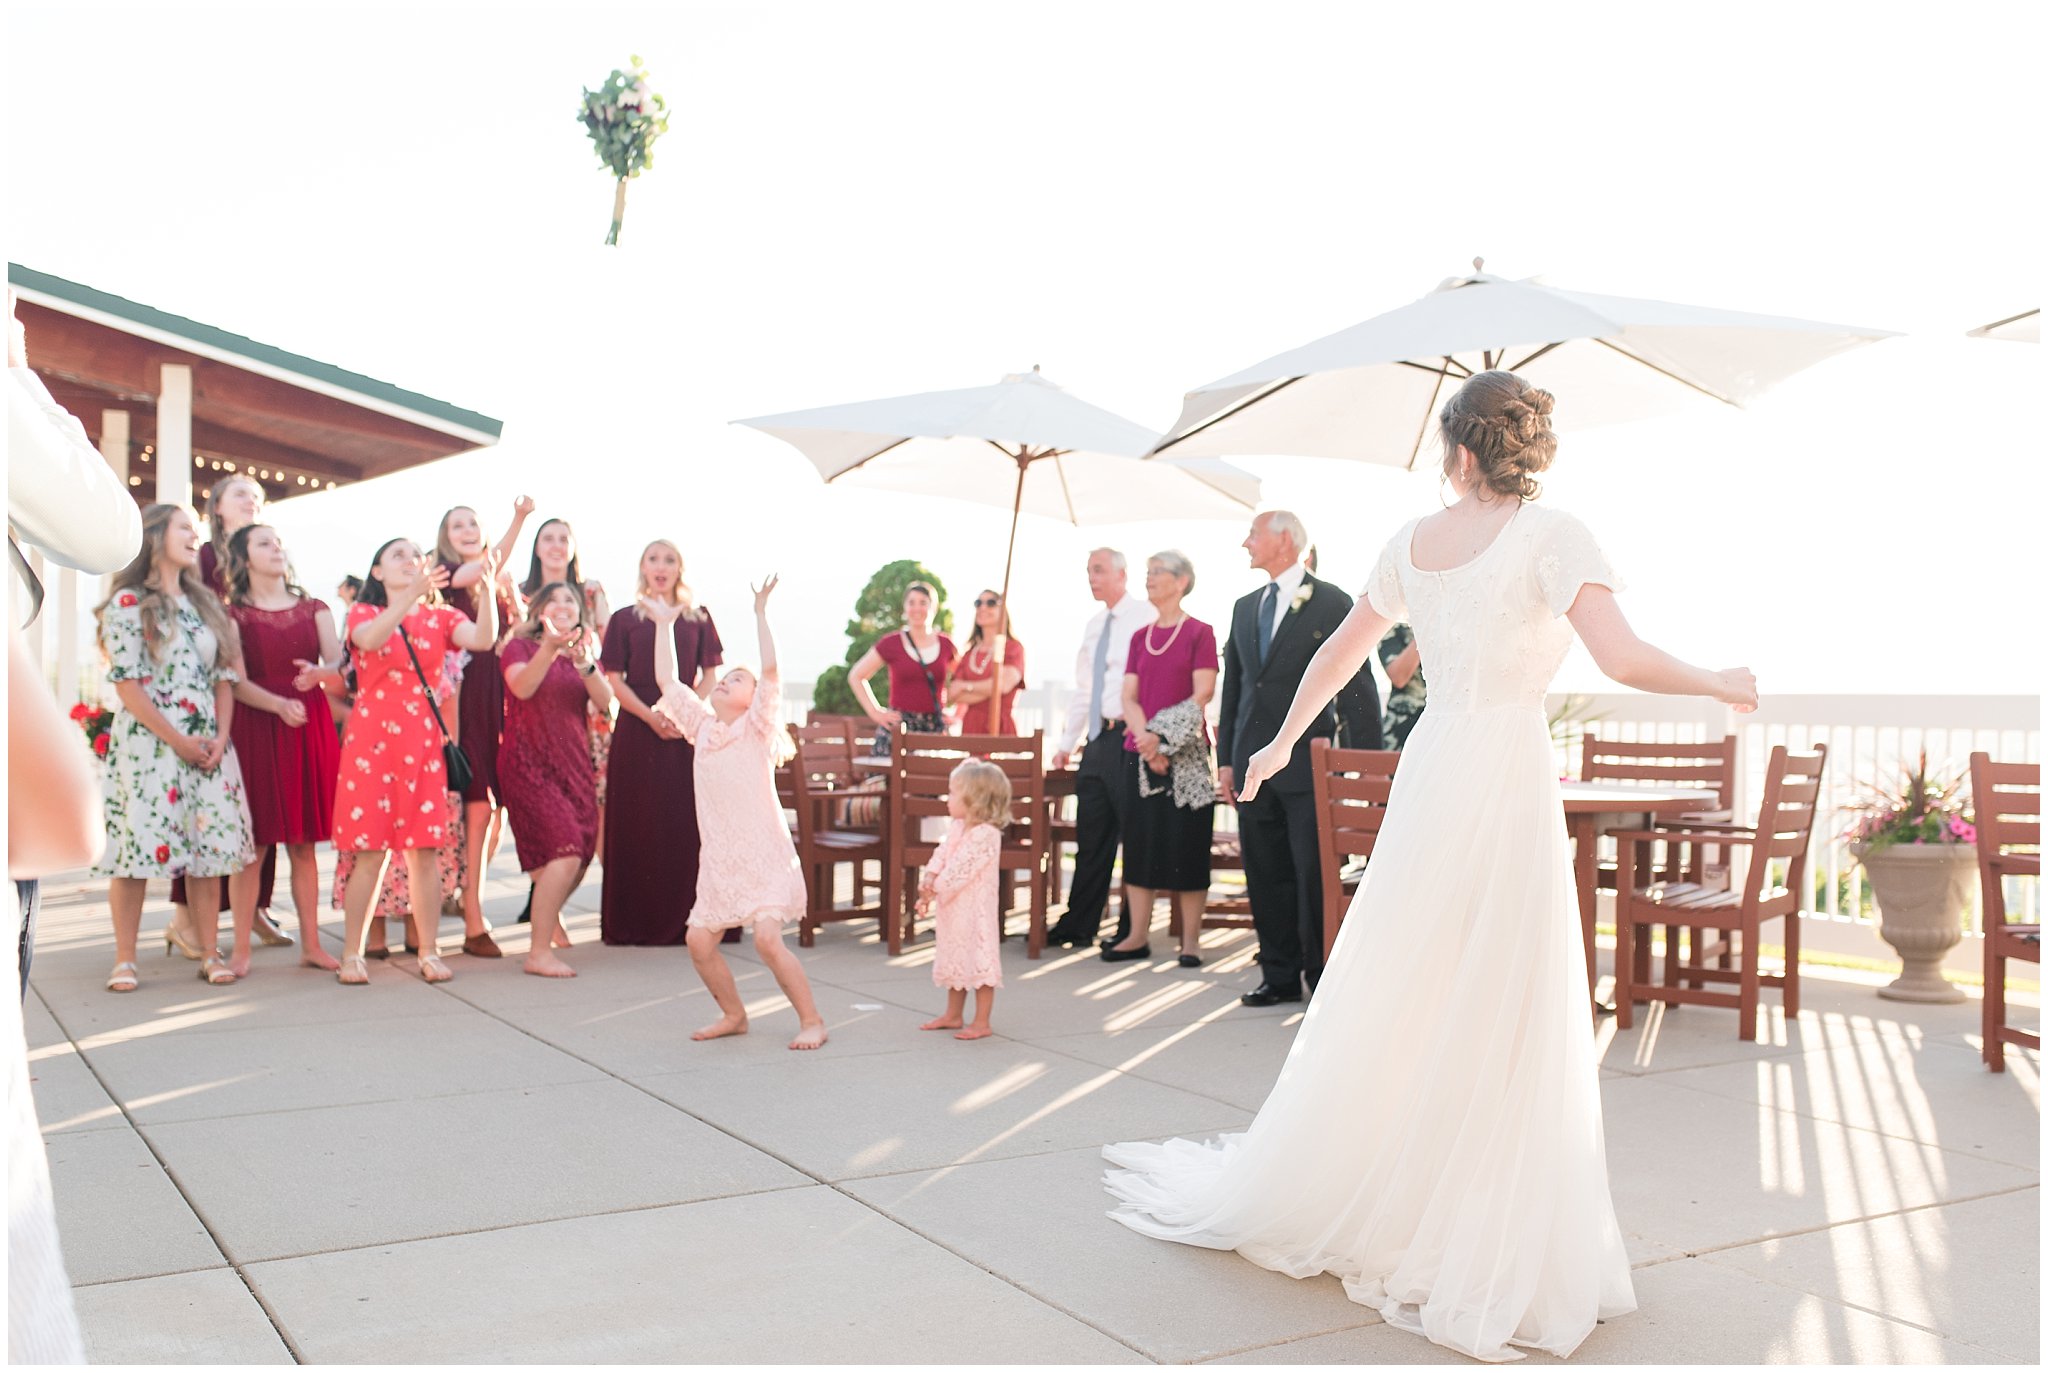 Bouquet toss at reception | Grey, Burgundy, and Gold Wedding | Draper Temple and South Mountain Wedding | Utah Wedding Photographers | Jessie and Dallin Photography